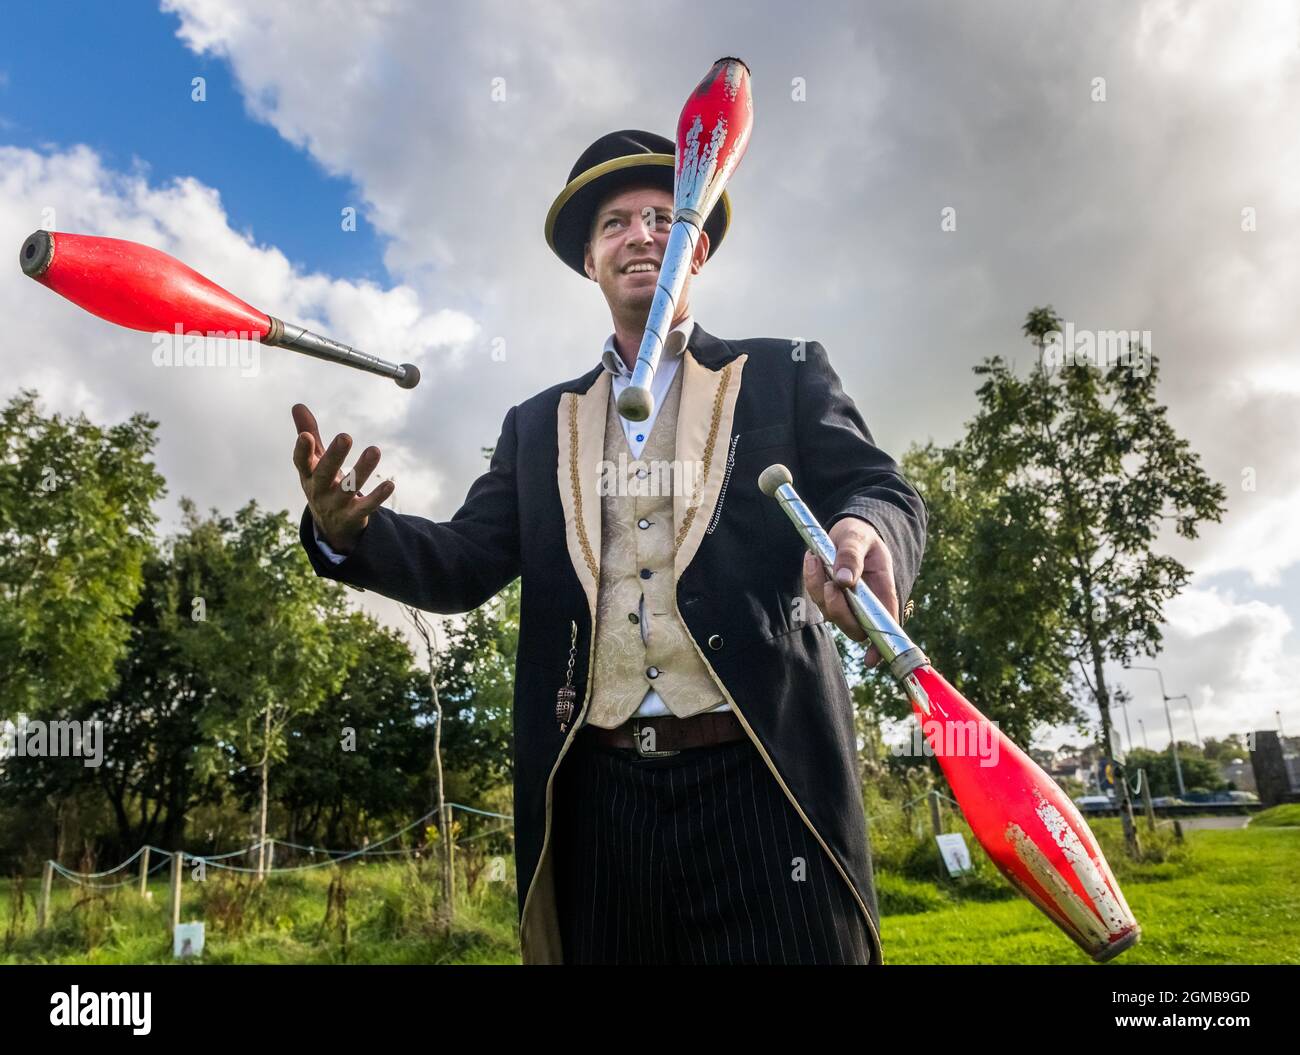 Carrigaline, Cork, Ireland. 17th September, 2021. Juggler Paul Staniforth of the Wobbly Circus entertains the audience during Culture Night at the Community Park in Carrigaline, Co. Cork, Ireland. - Picture; David Creedon / Alamy Live News Stock Photo